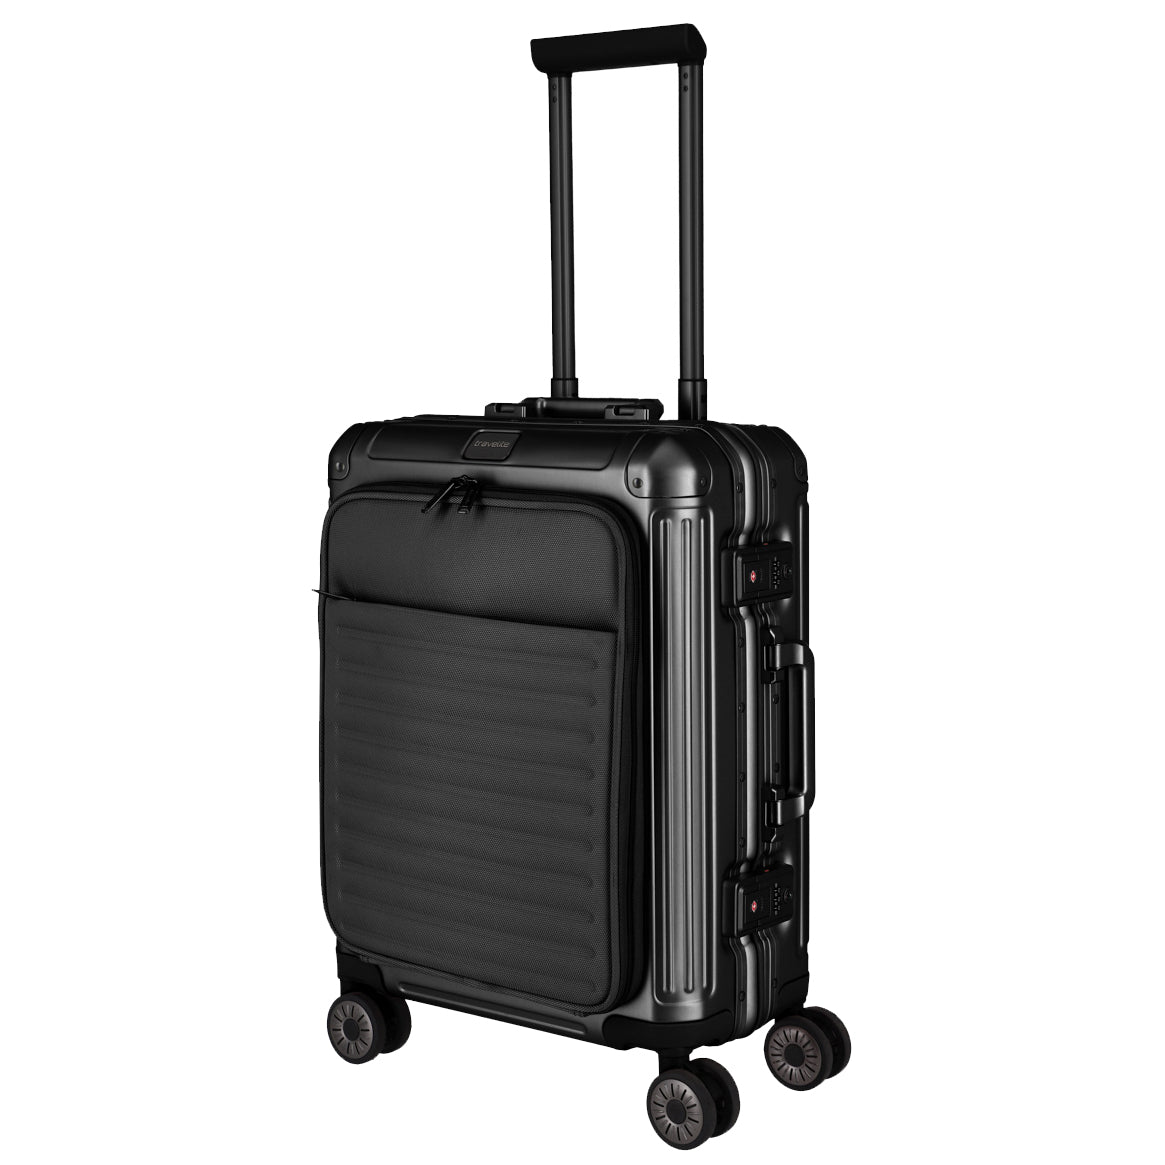 Travelite Next 2.0 4-wheel trolley S with front pocket - black